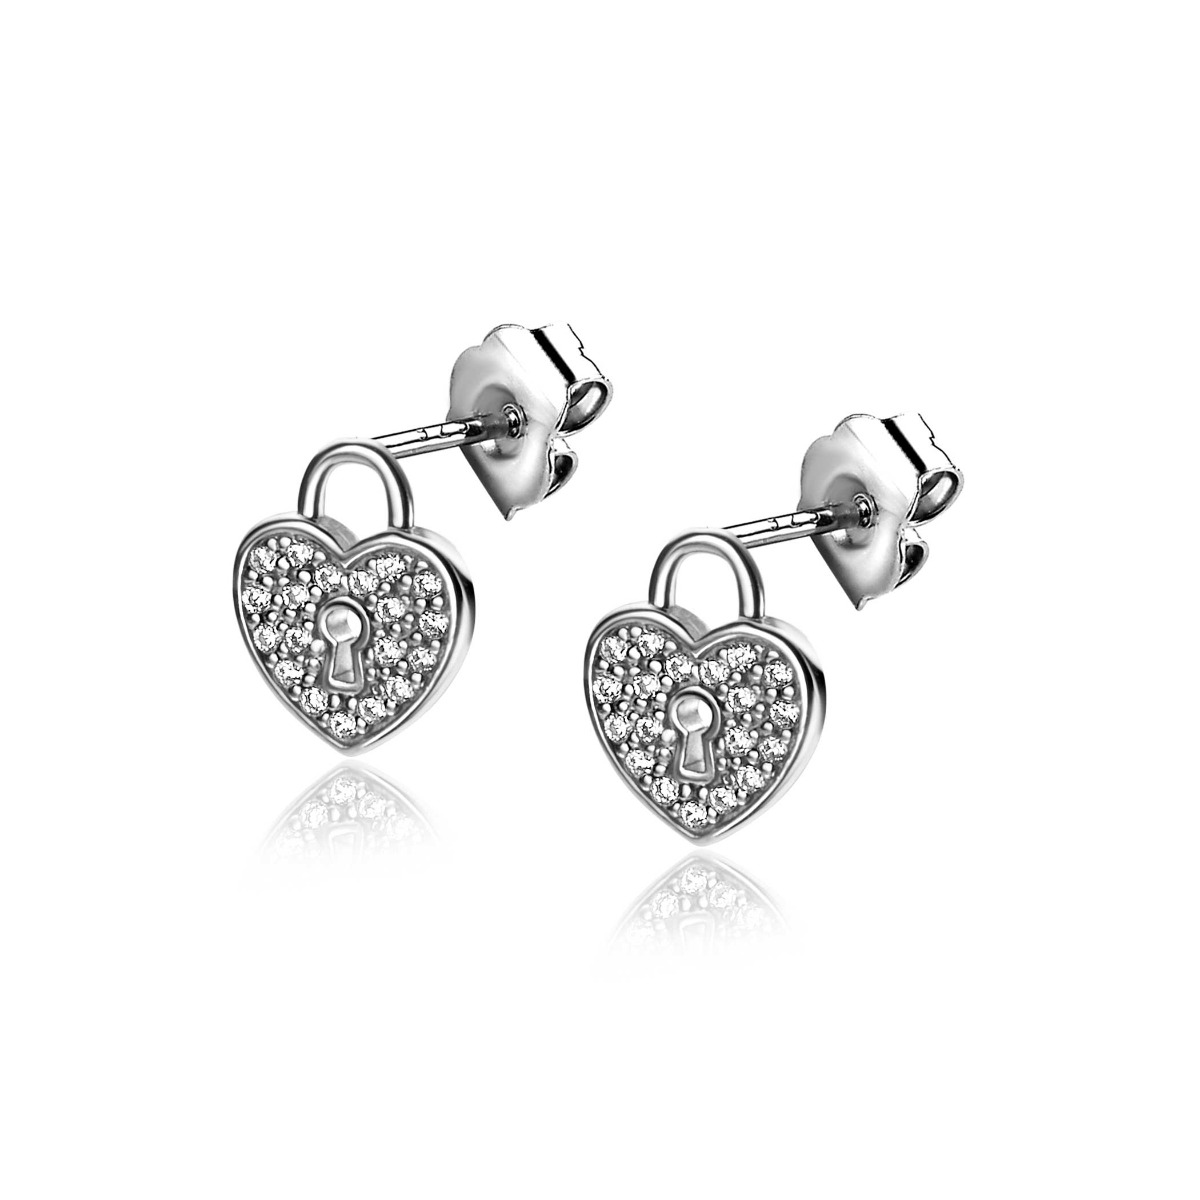 10mm ZINZI Sterling Silver Stud Earrings Heart with Keyhole and White Zirconias ZIO2400